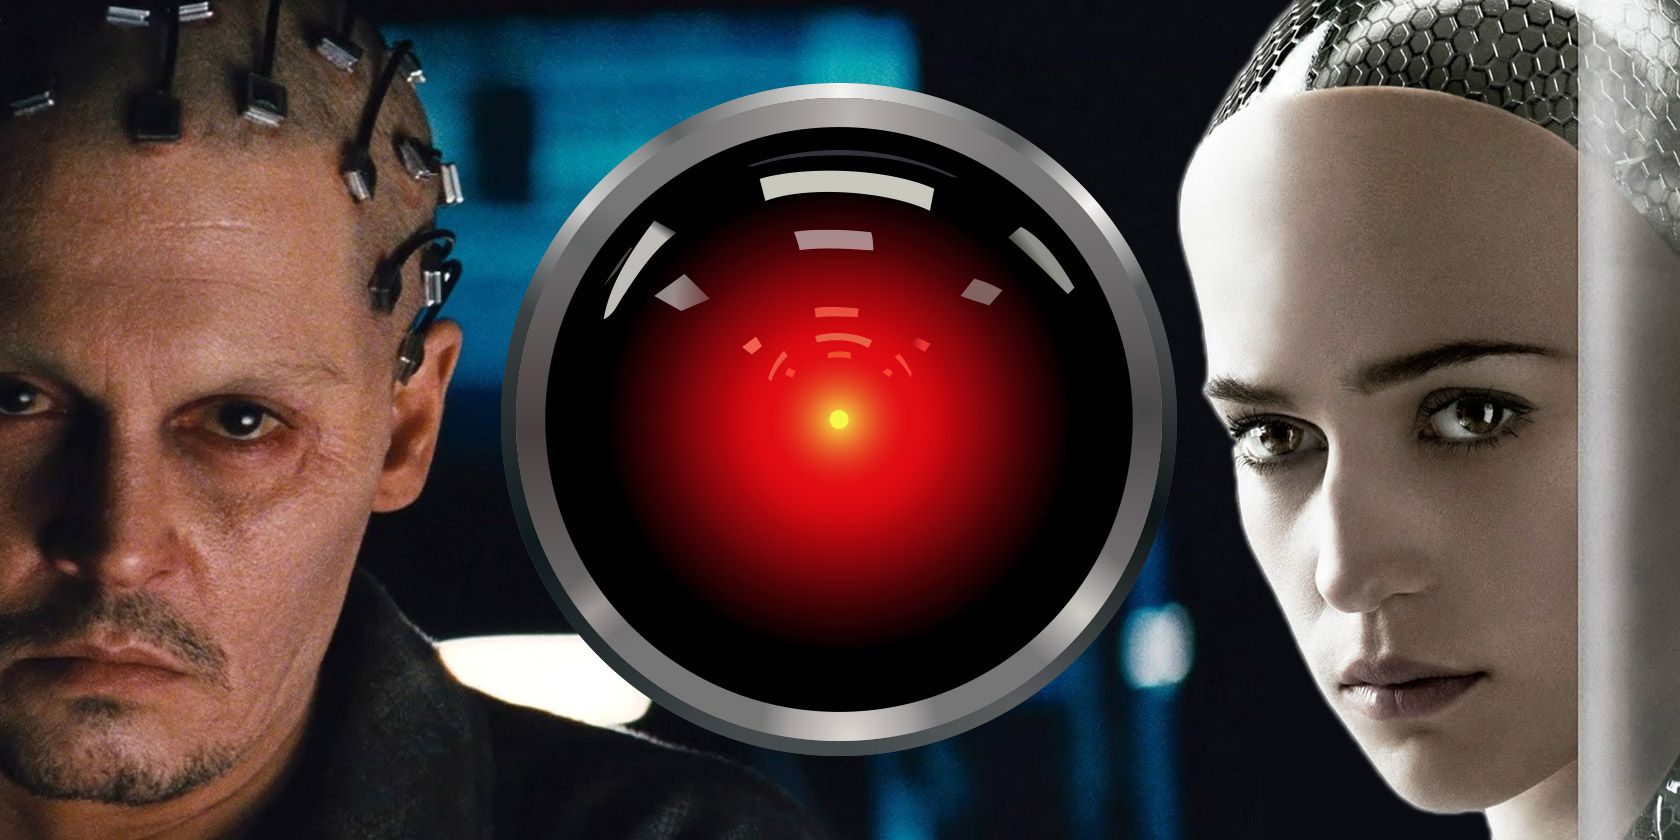 movies about artificial intelligence and new social media